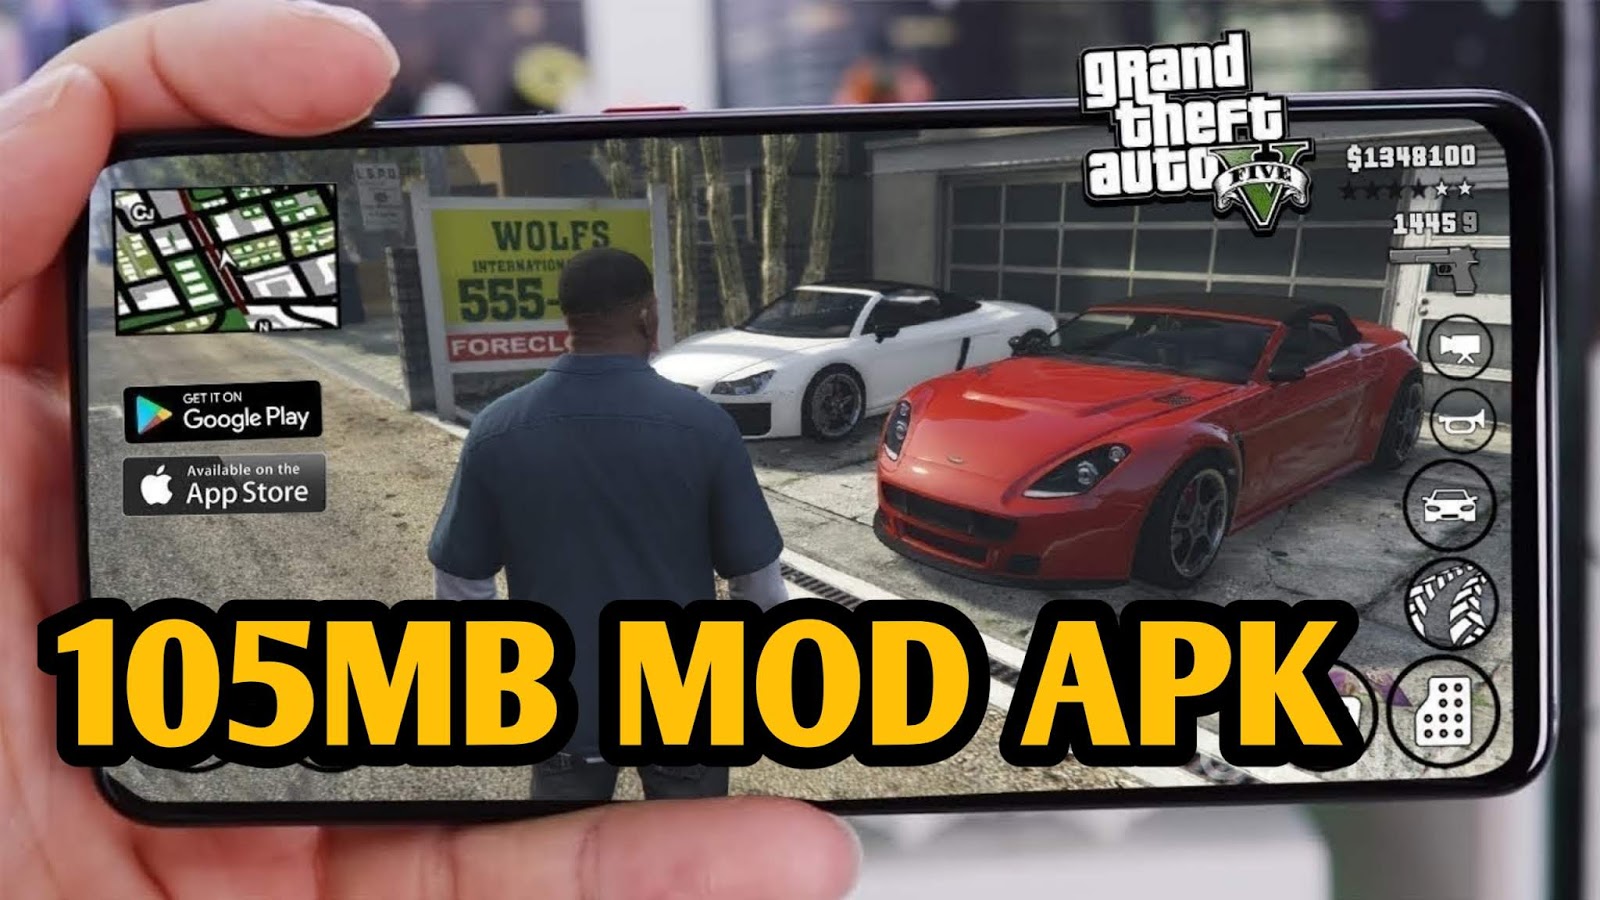 GTA 5 MOD APK FOR ANDROID MOBILE  NEW GTA 5 MOD APK IN 2020  HOW TO